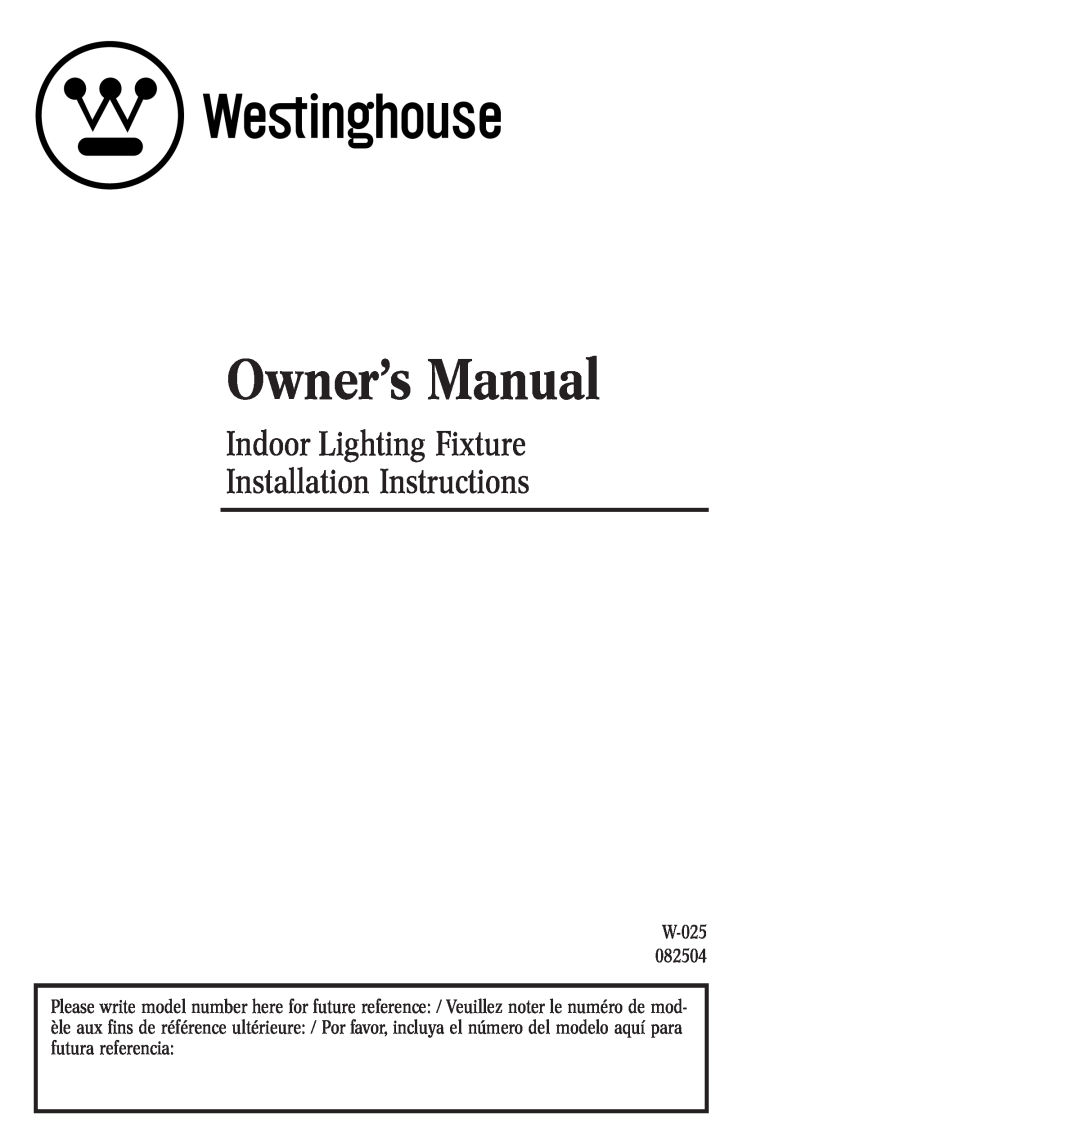 Westinghouse 82504 owner manual Indoor Lighting Fixture Installation Instructions 